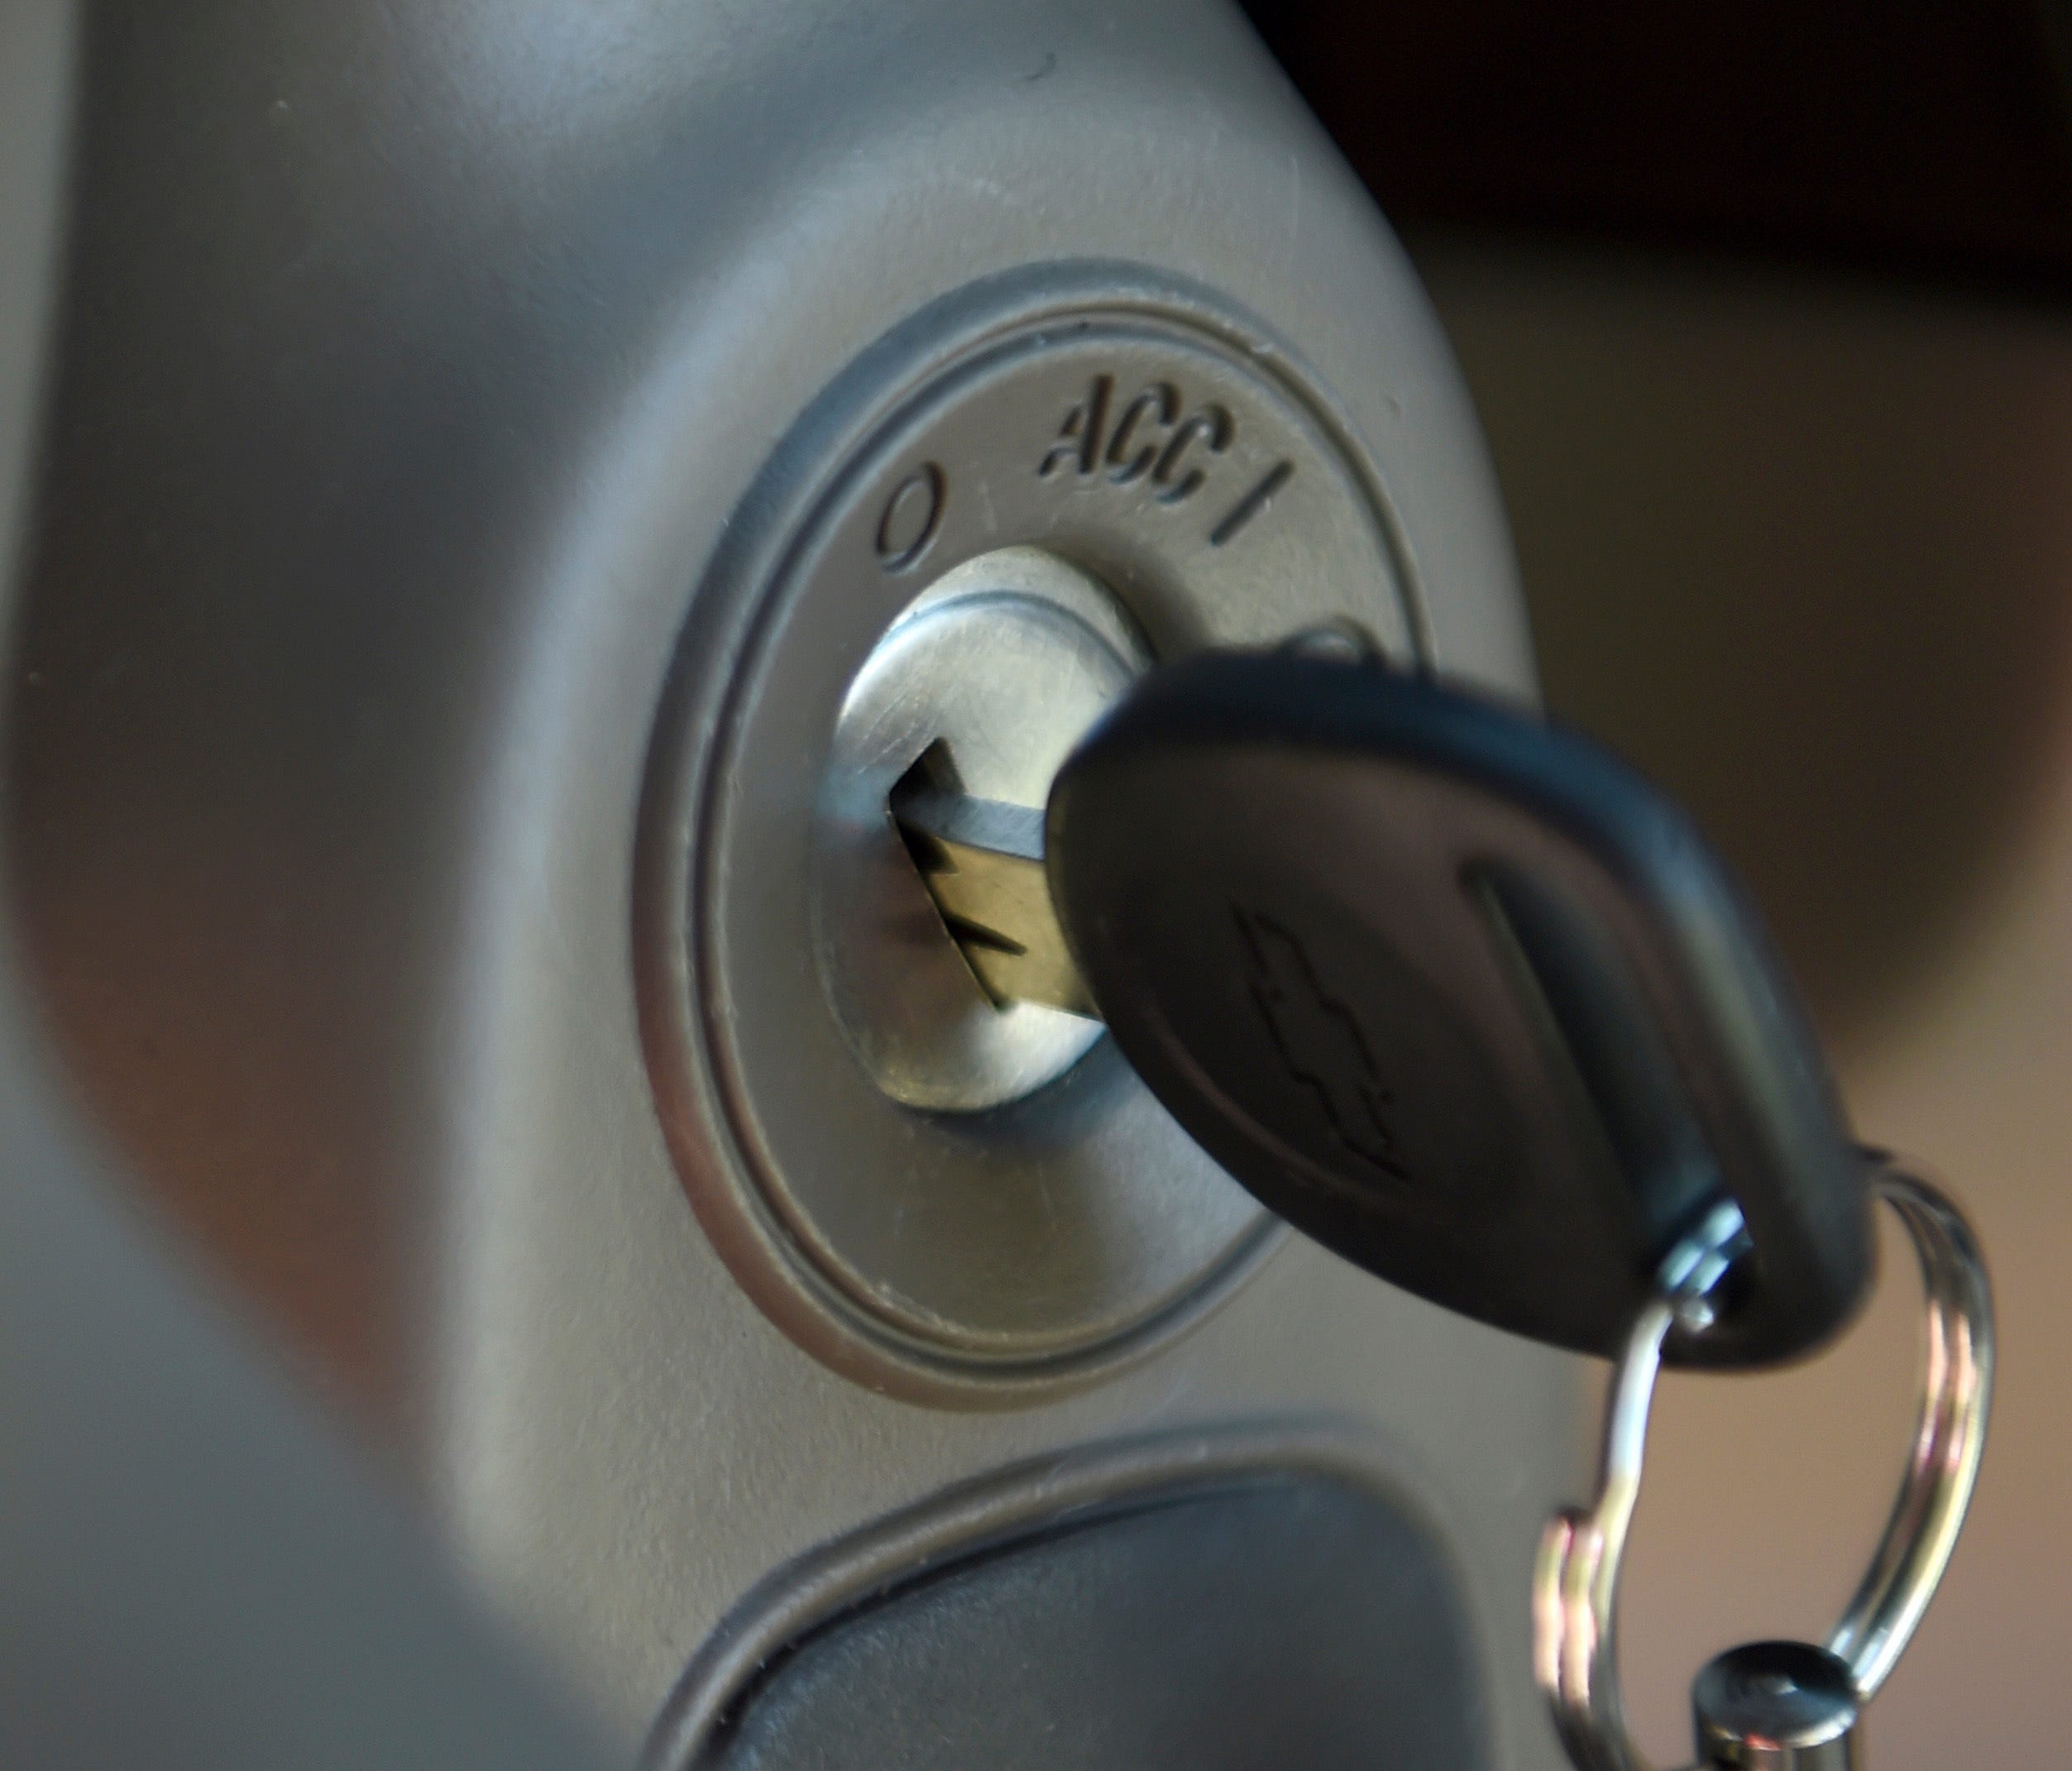 File photo taken in 2014 shows a key in the ignition switch of a 2005 Chevrolet Cobalt in Alexandria, Va.